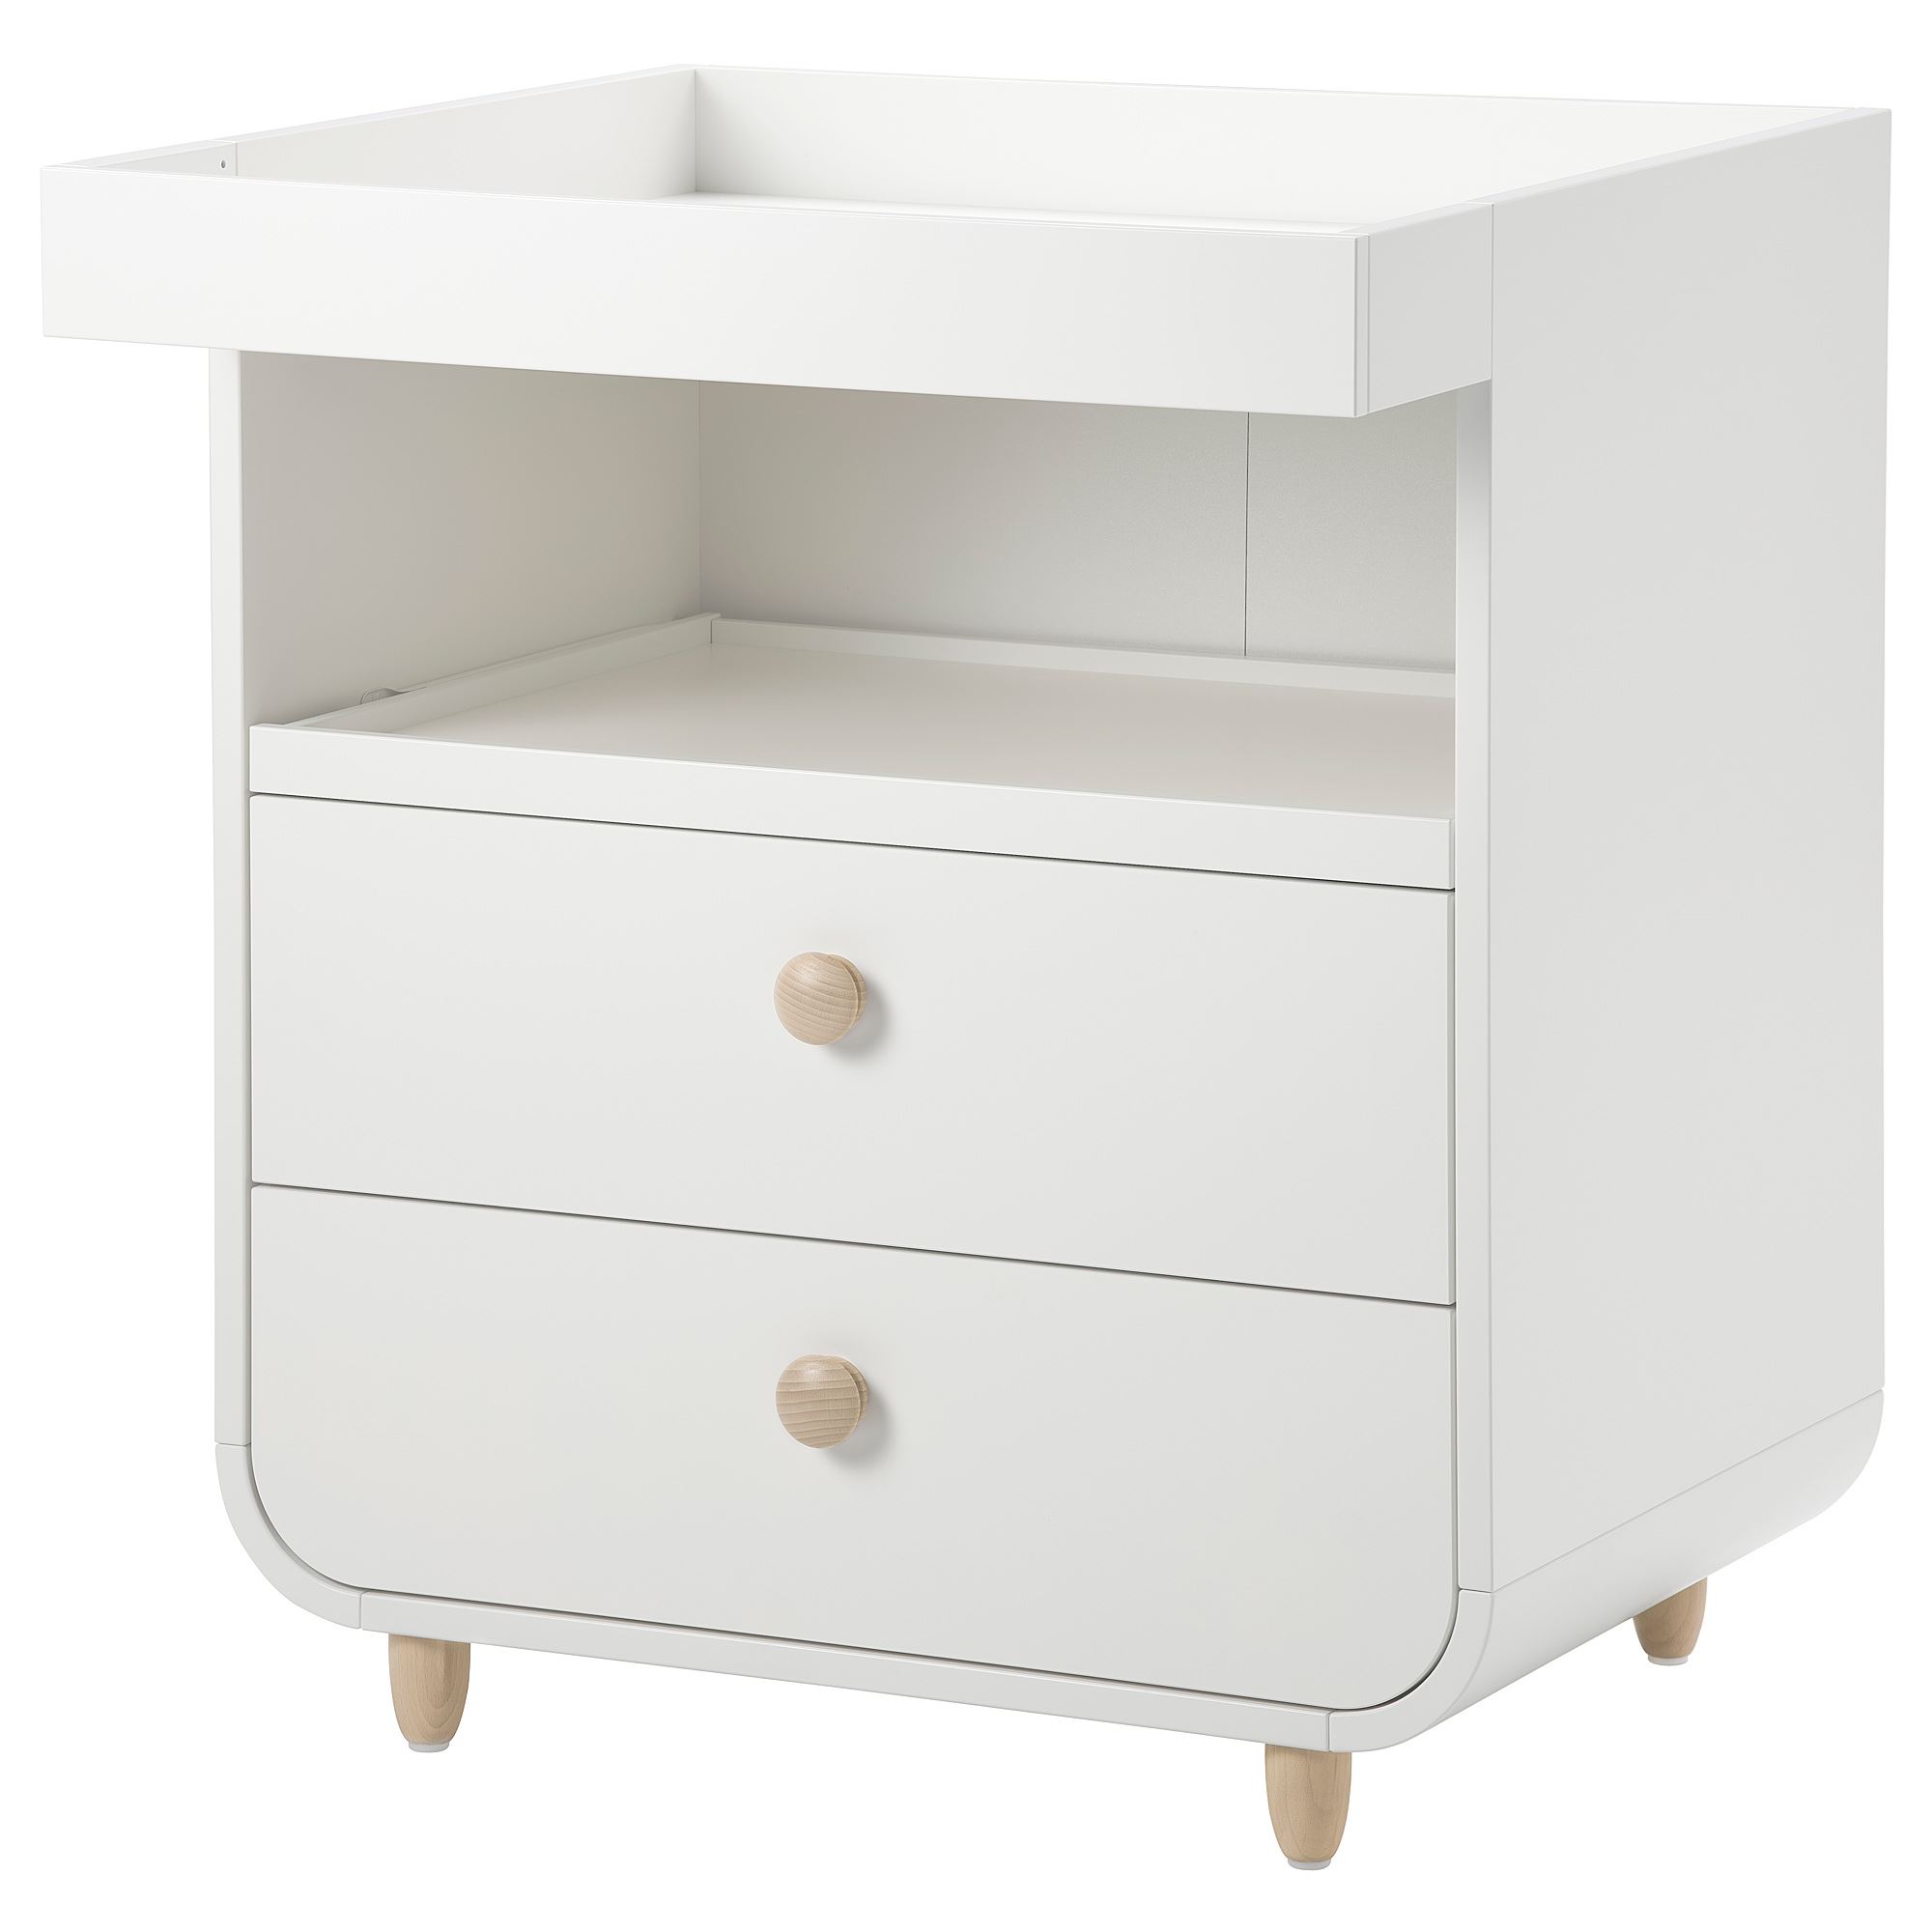 children's changing table